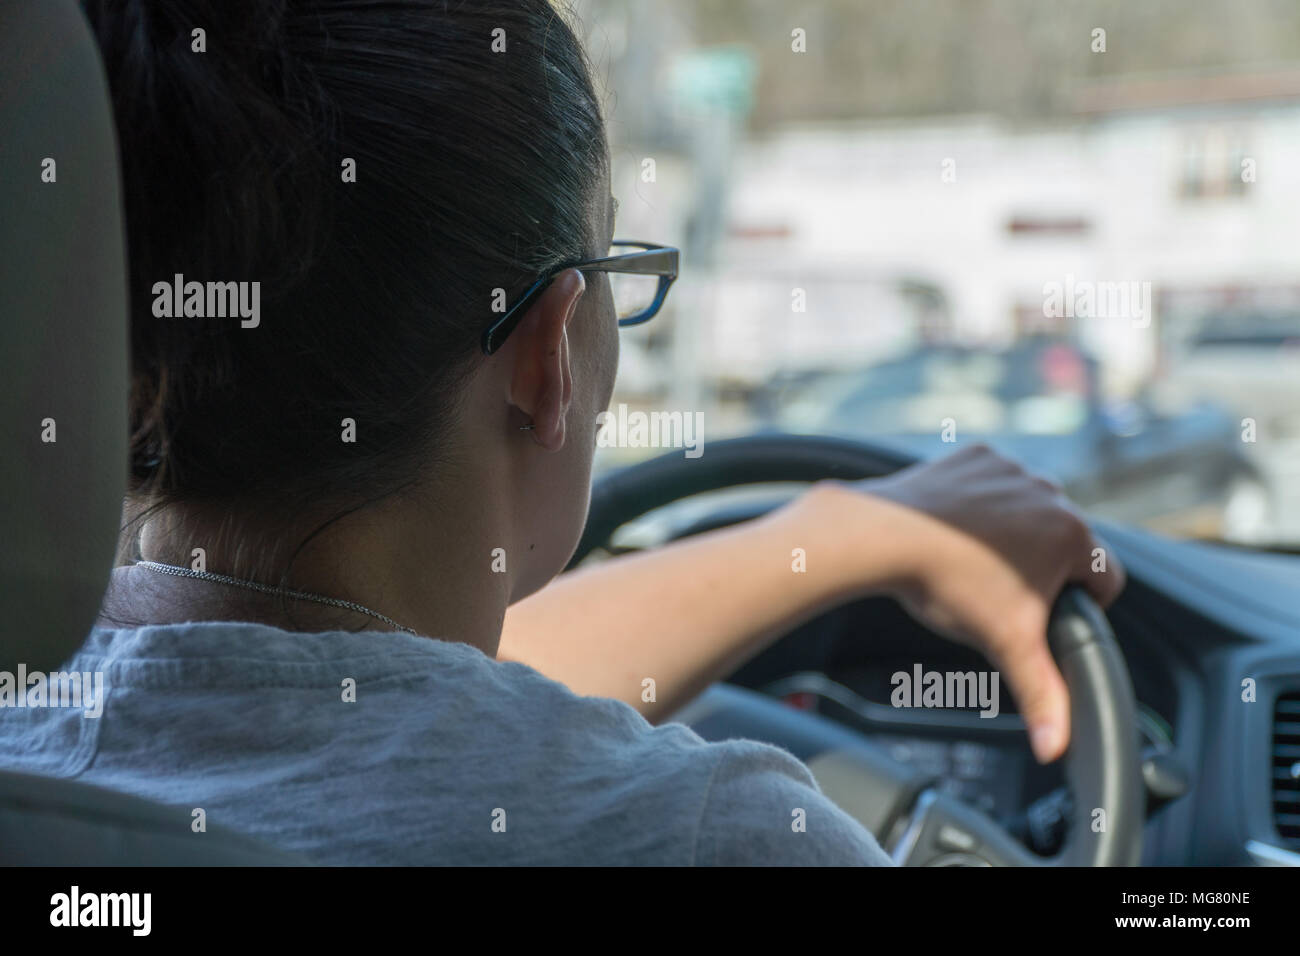 Over the shoulder POV young woman driving a car on a busy urban street road during the day time. Stock Photo